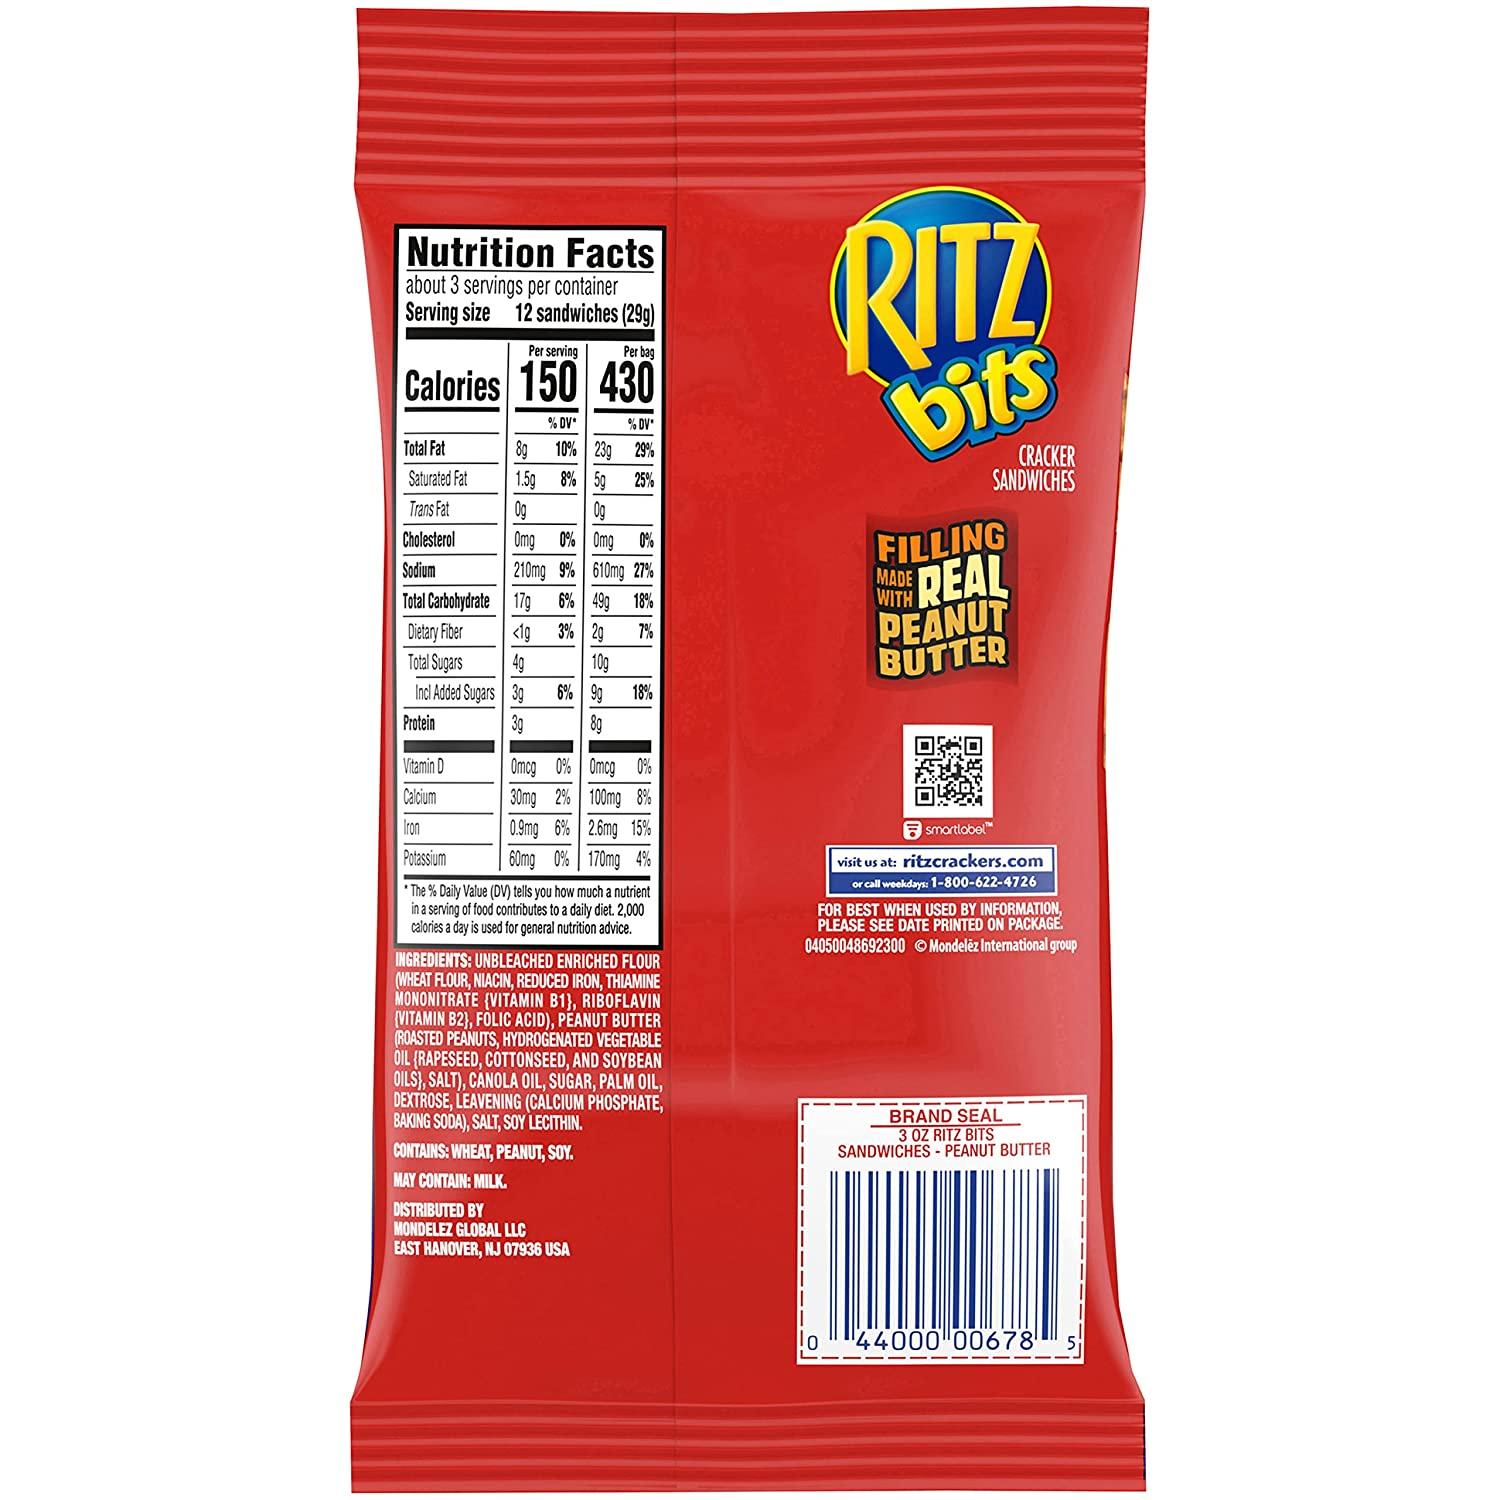 Price/Pack)Cheez-It Grab Bag Reclosable Classic Snack Mix 6 Ounces